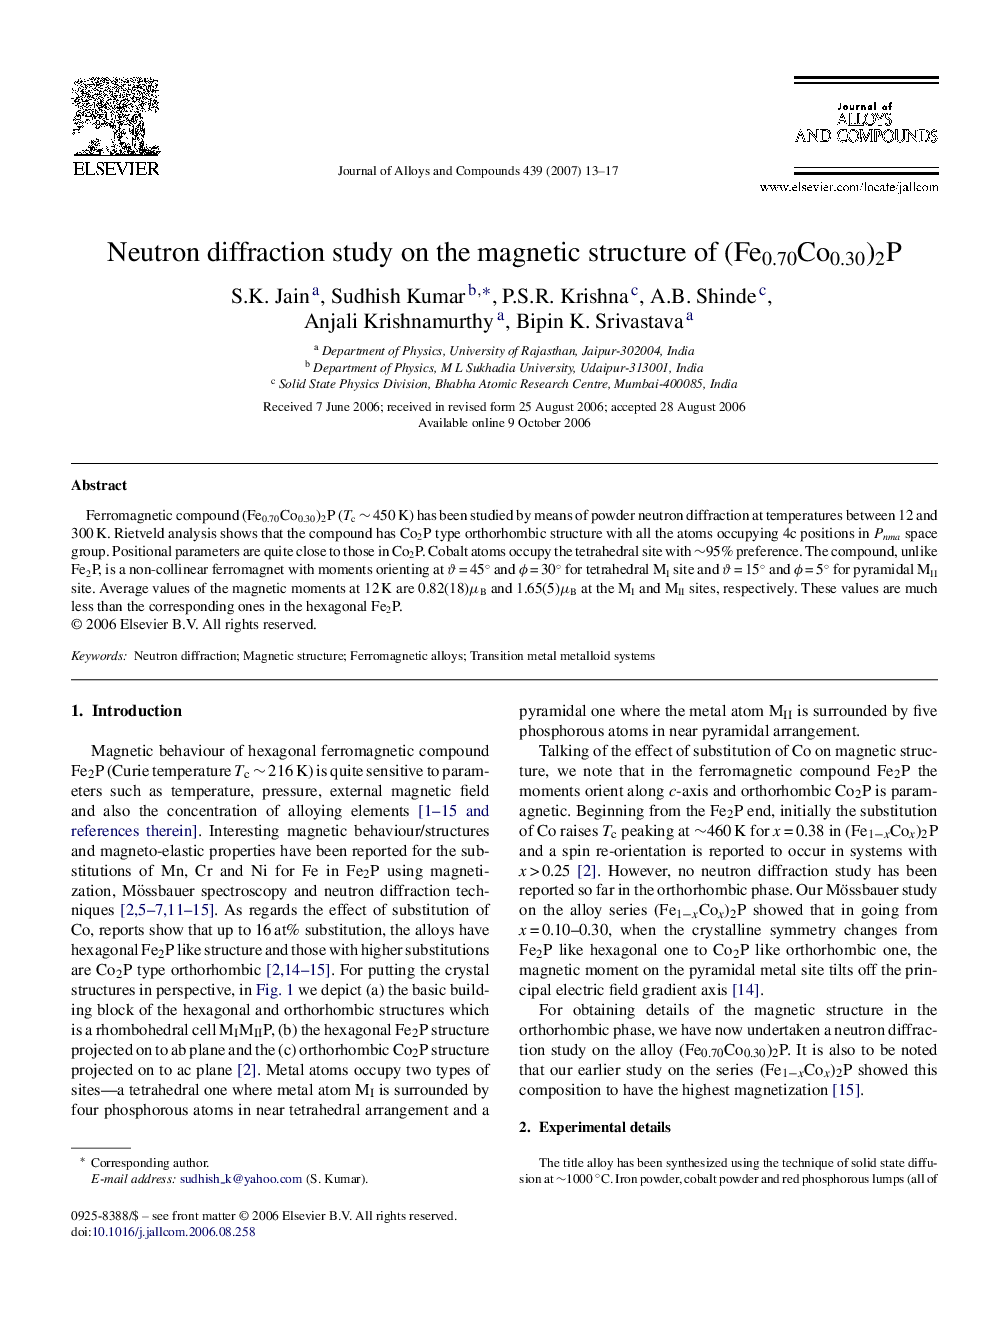 Neutron diffraction study on the magnetic structure of (Fe0.70Co0.30)2P